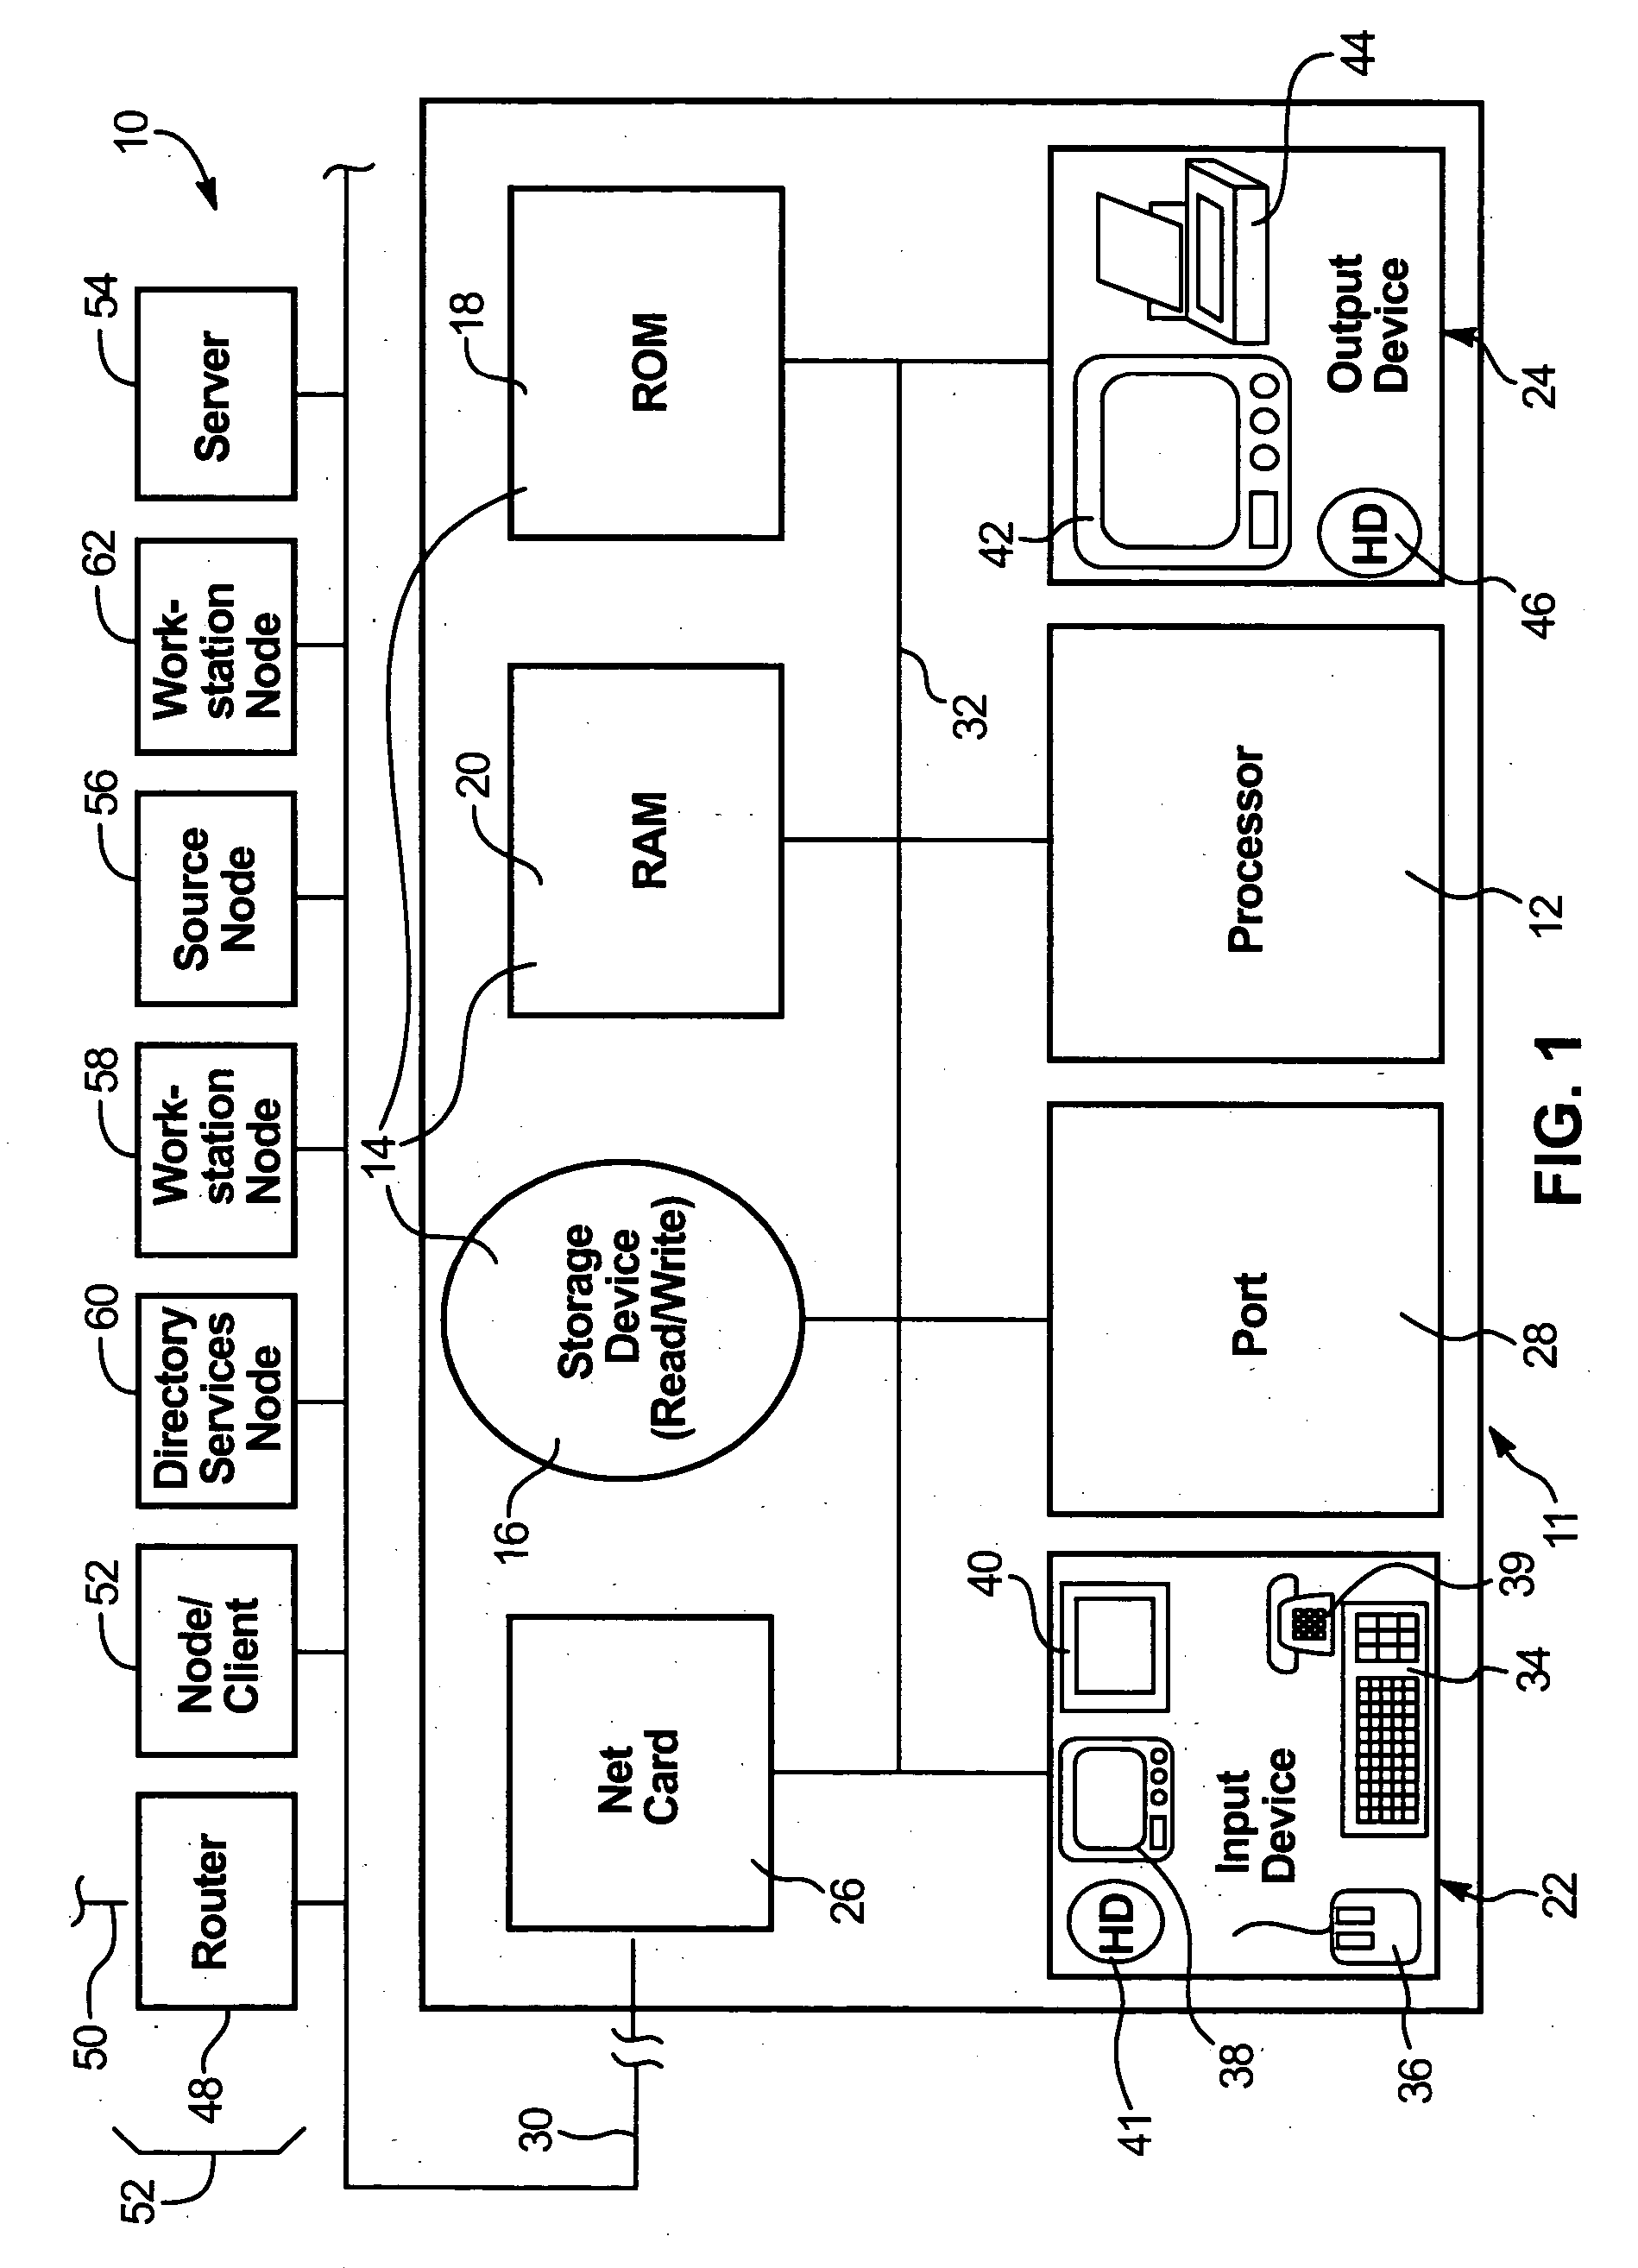 Online transaction hosting apparatus and method